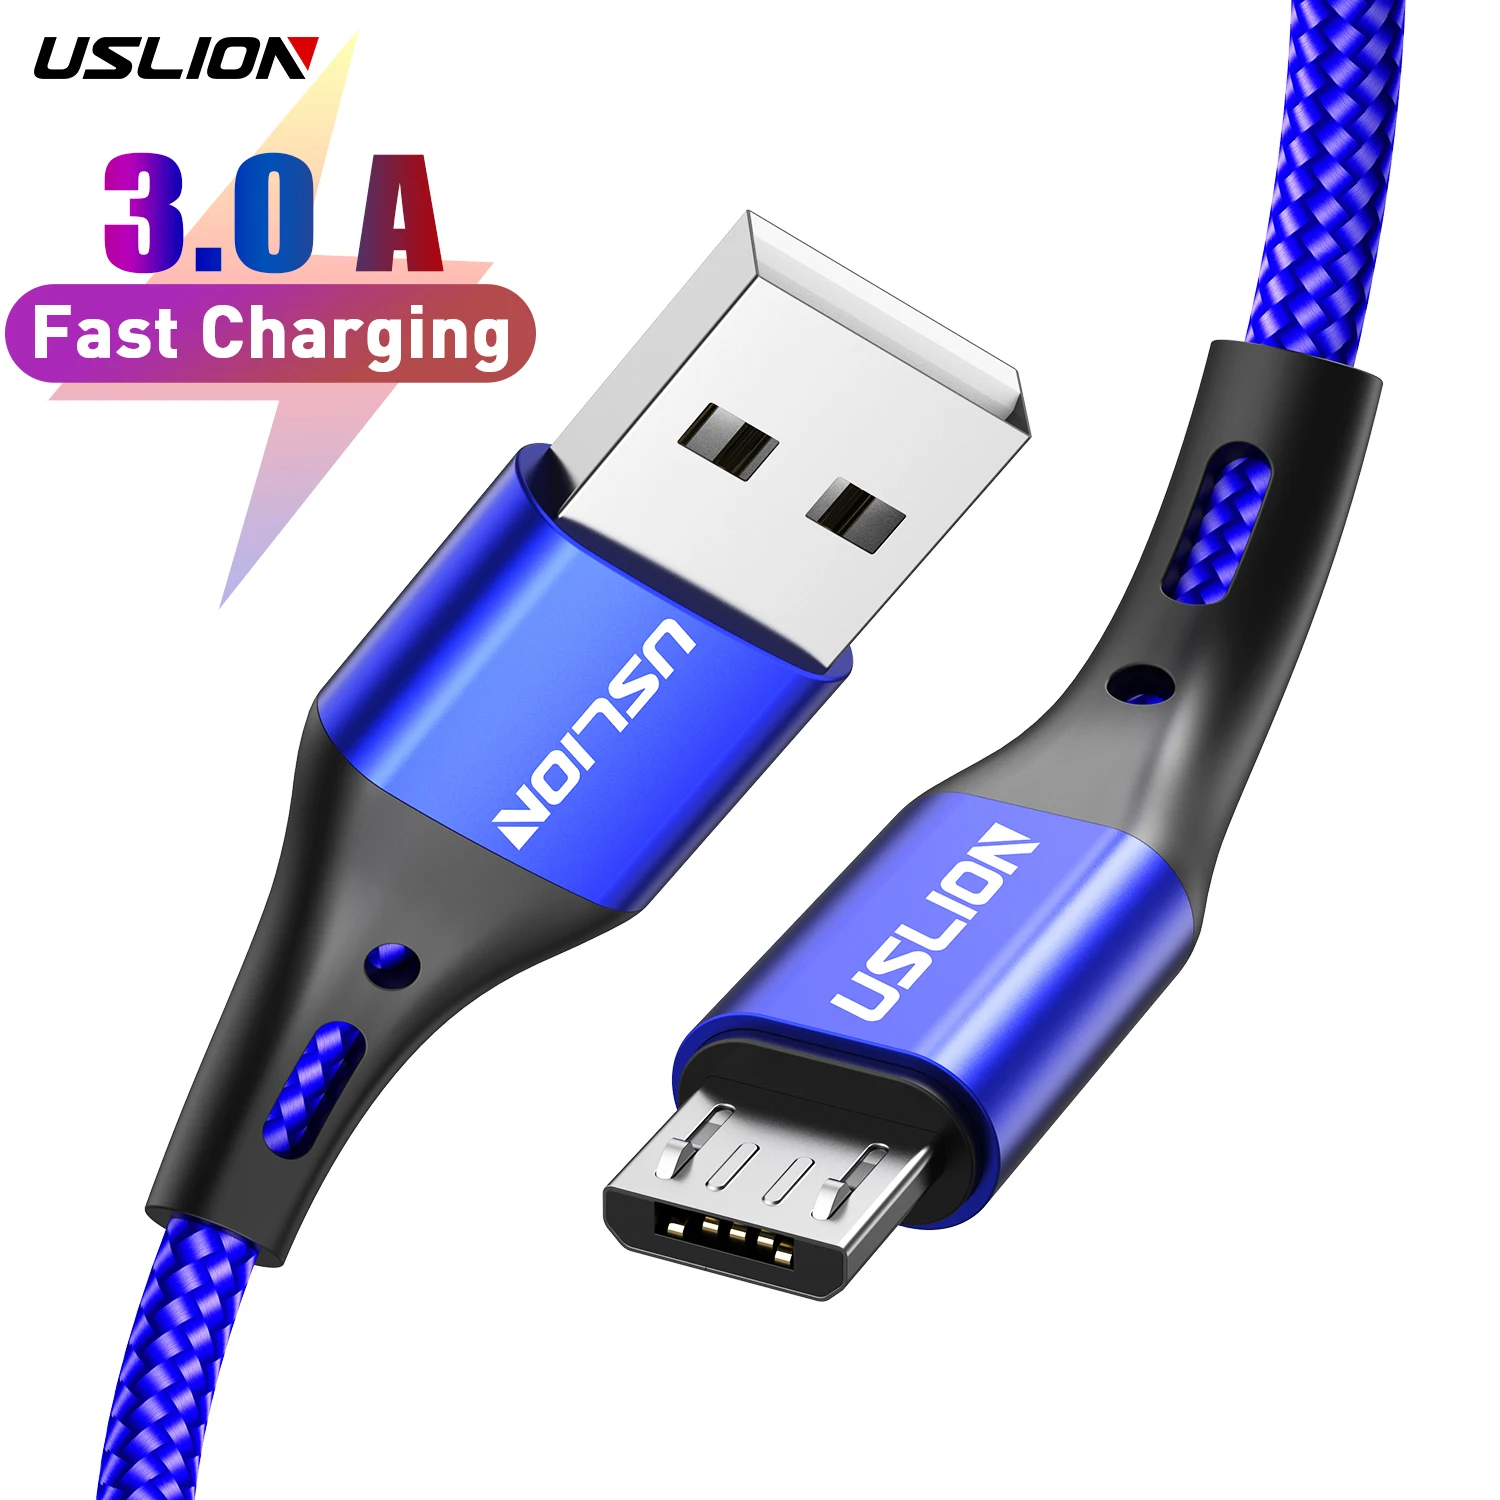 

USLION 2M 6.6ft 3A Fast Charging Data Cable Mobile Phone USB Cable Micro Cable for Samsung QC 3.0 Quick Charging, Black,blue,purple,red